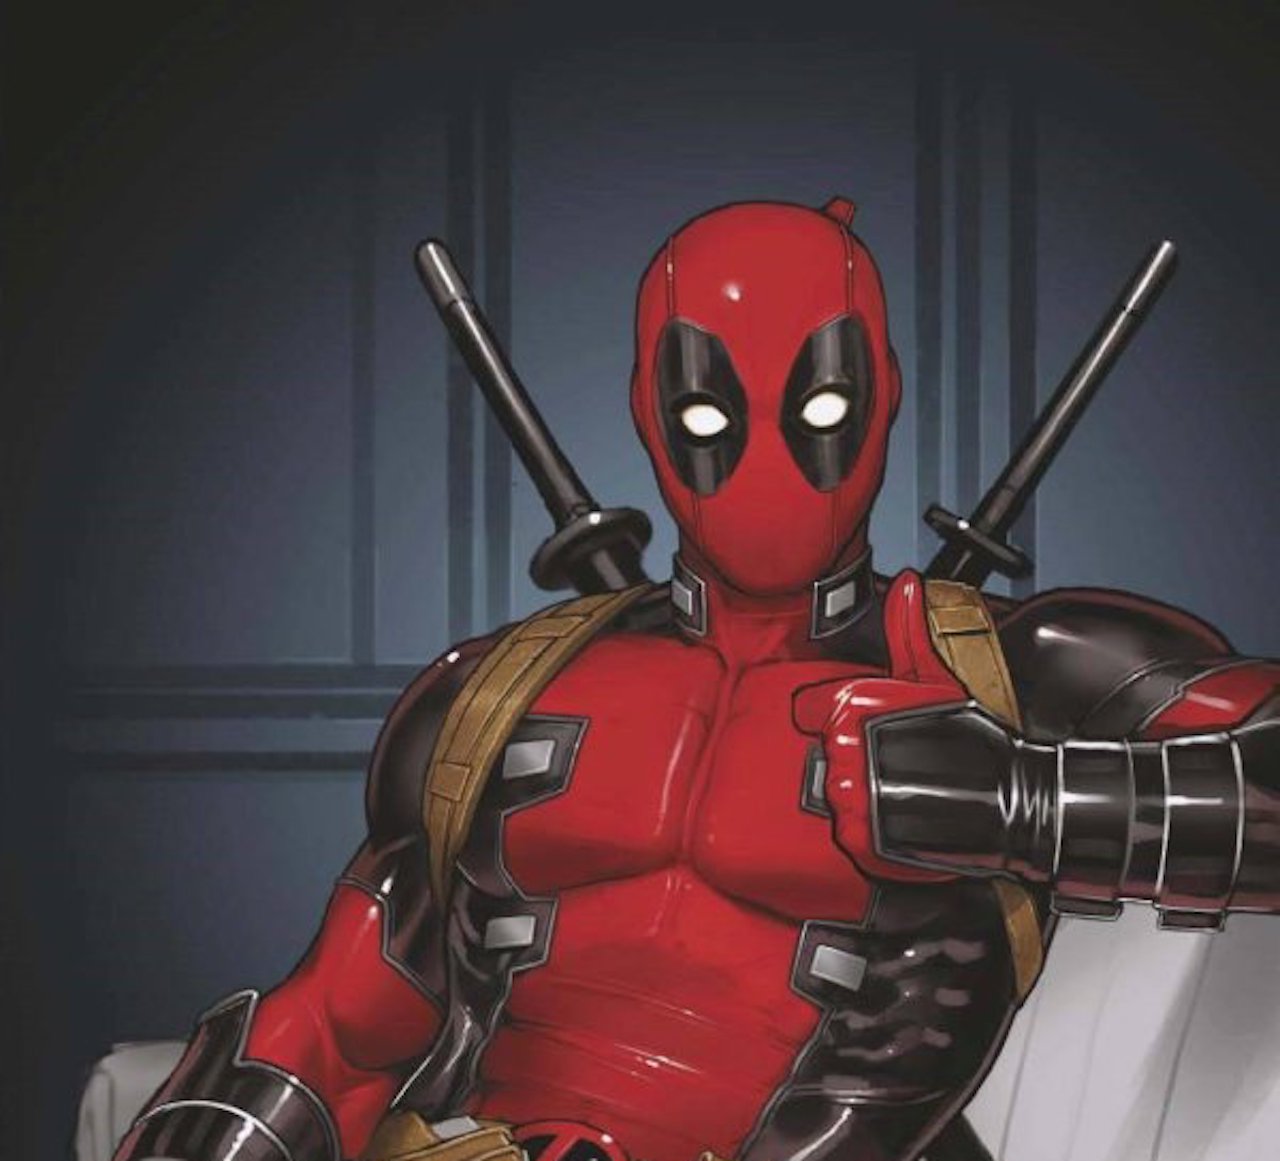 A romance emerges for Wade Wilson in 'Deadpool' #1